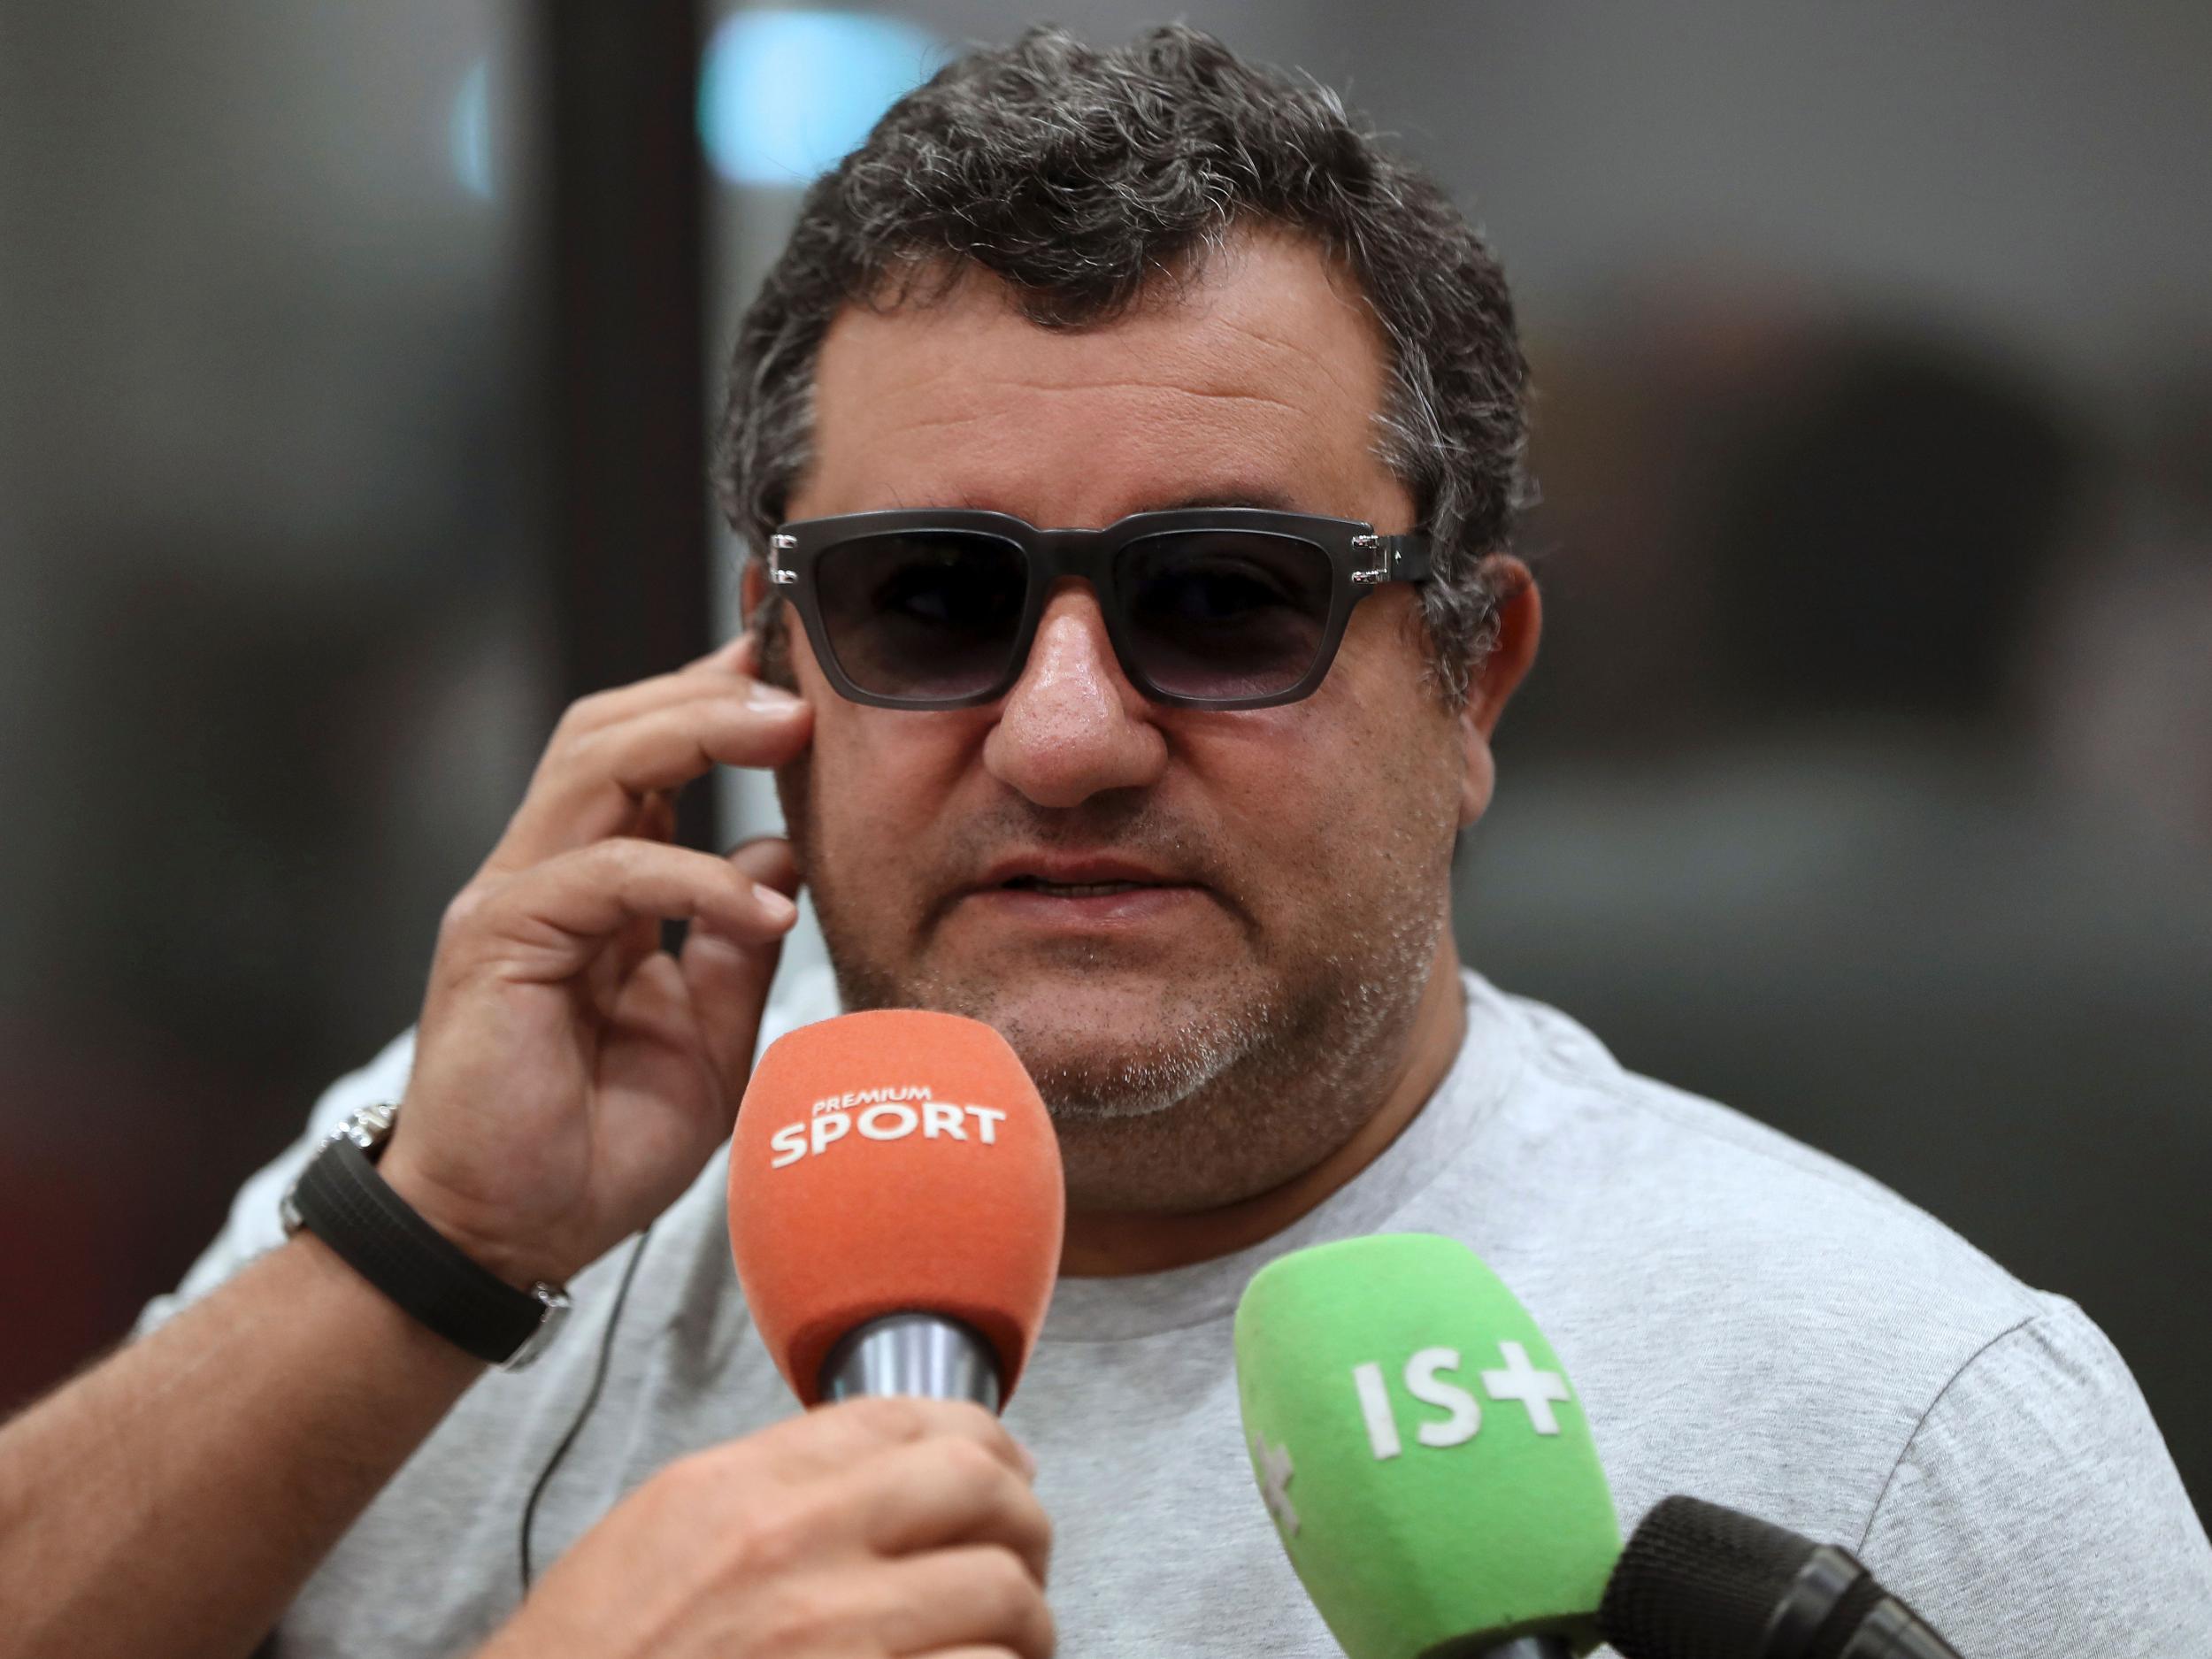 Raiola has insisted the transfer was above board